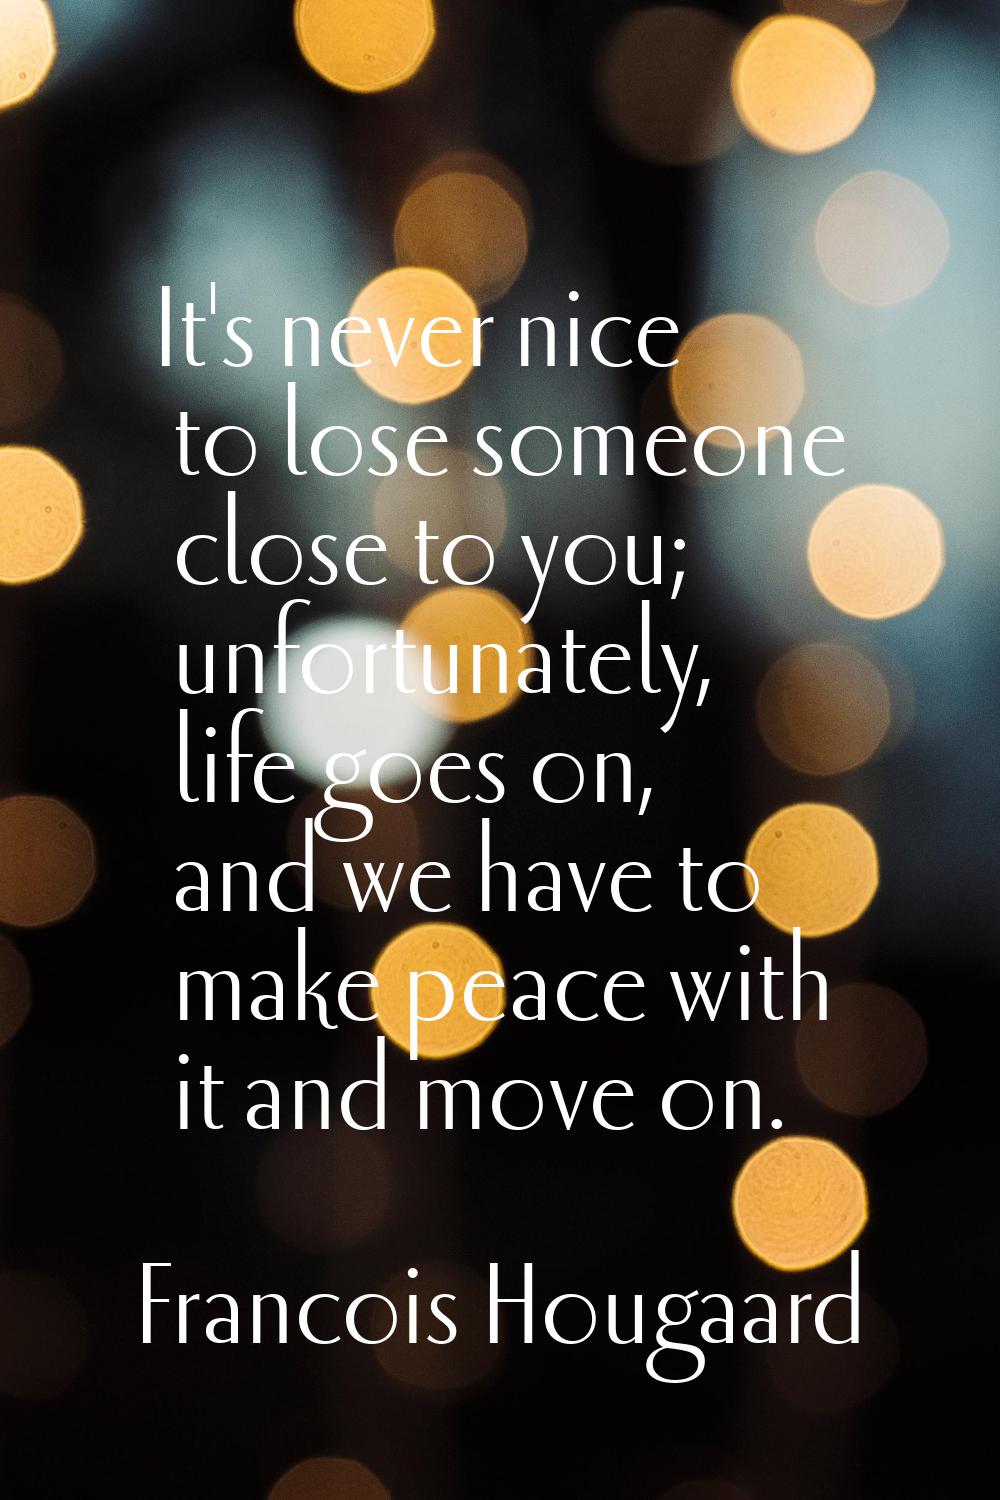 It's never nice to lose someone close to you; unfortunately, life goes on, and we have to make peac